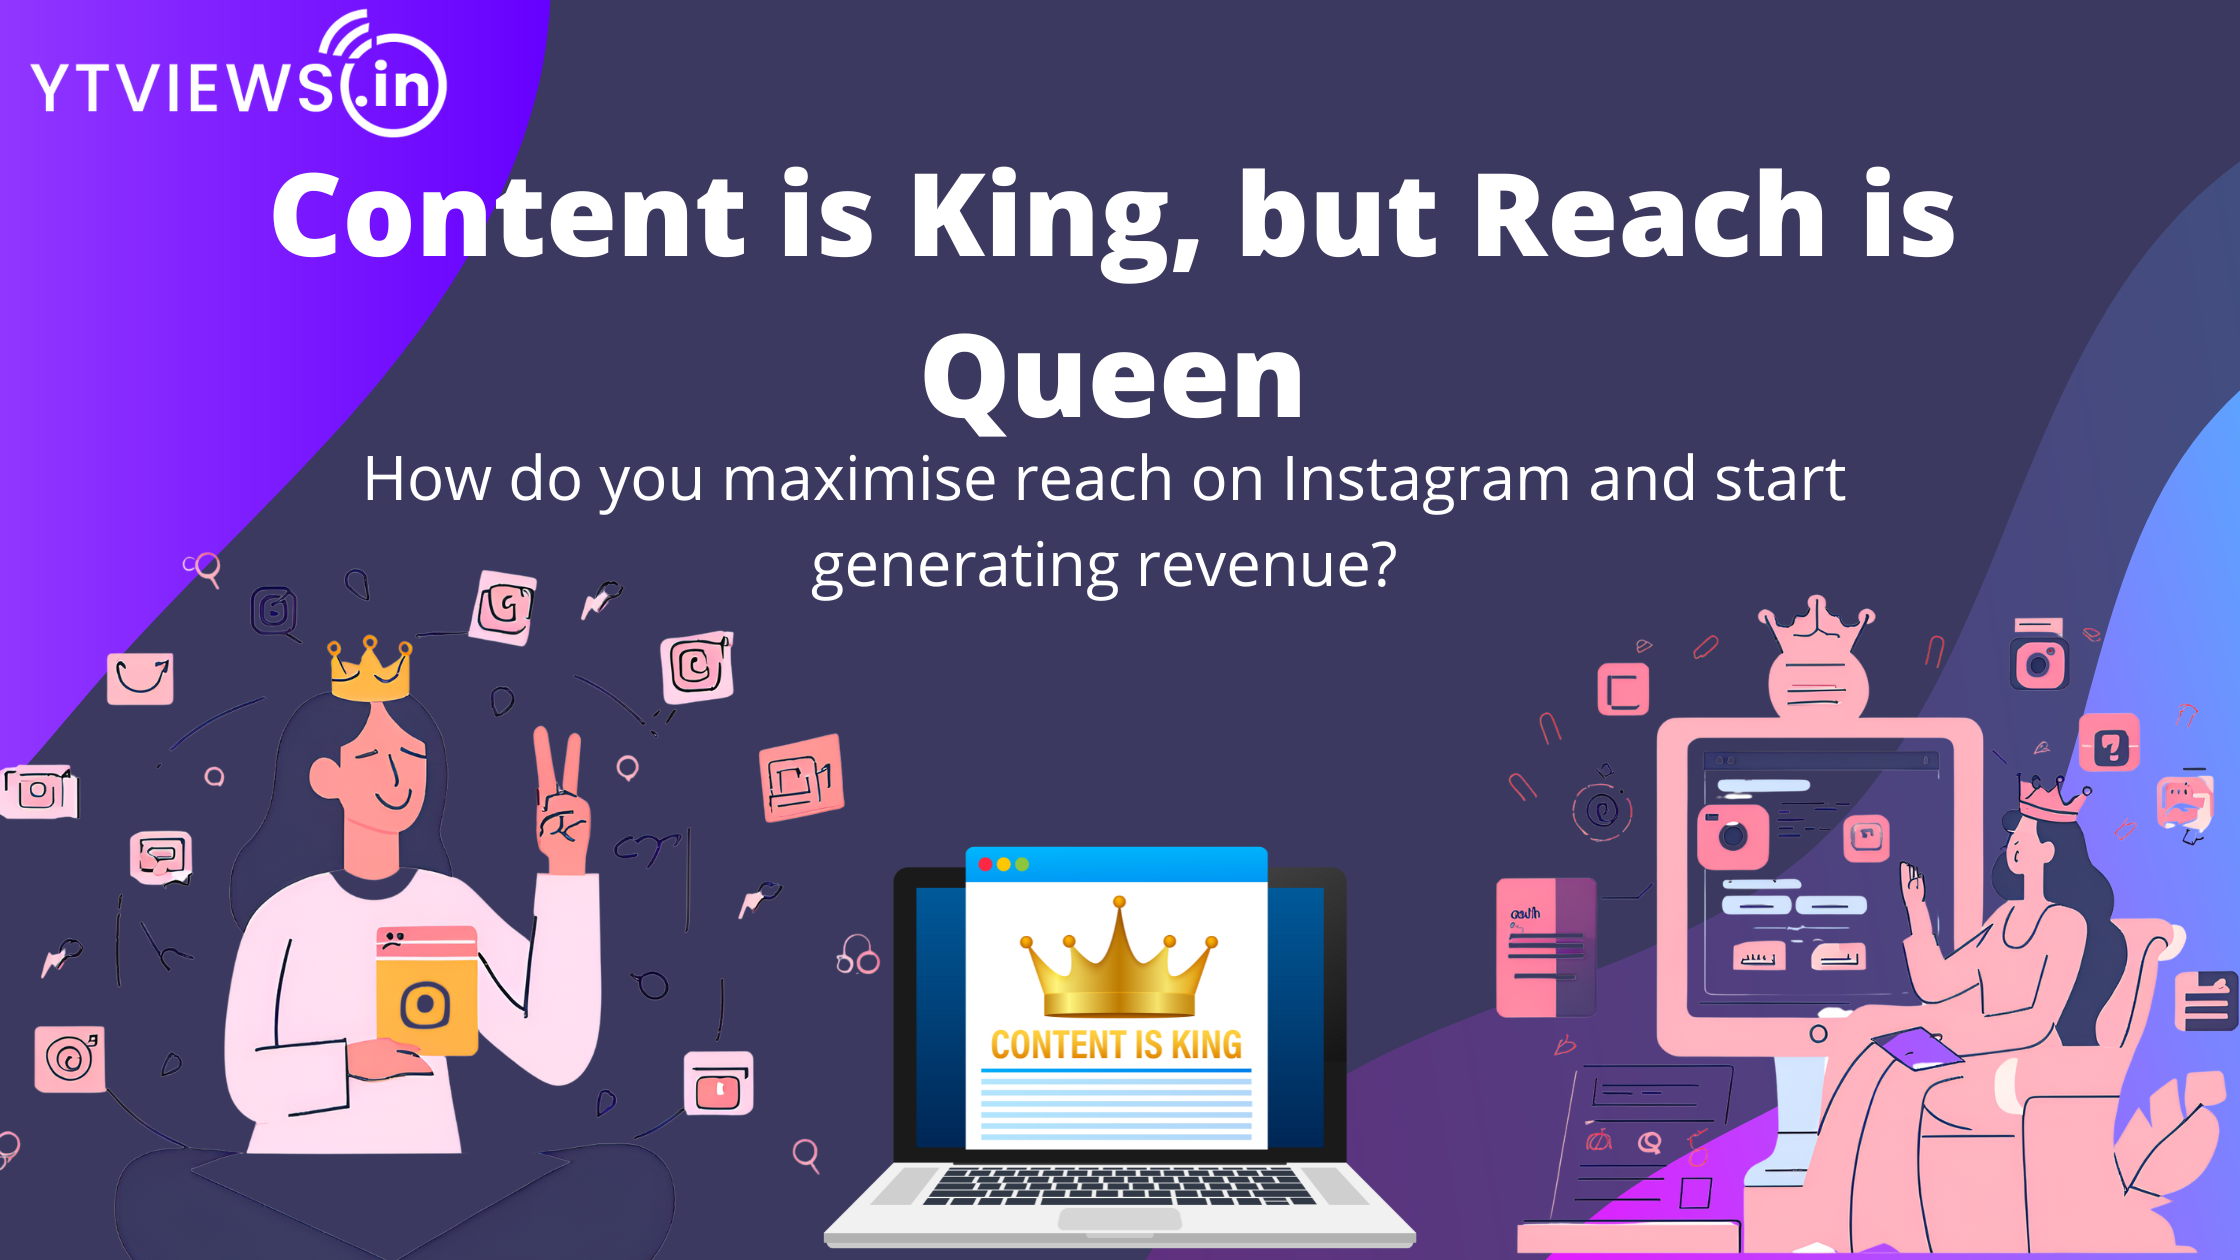 Content is King, but Reach is Queen: How do you maximize reach on Instagram and start generating revenue?